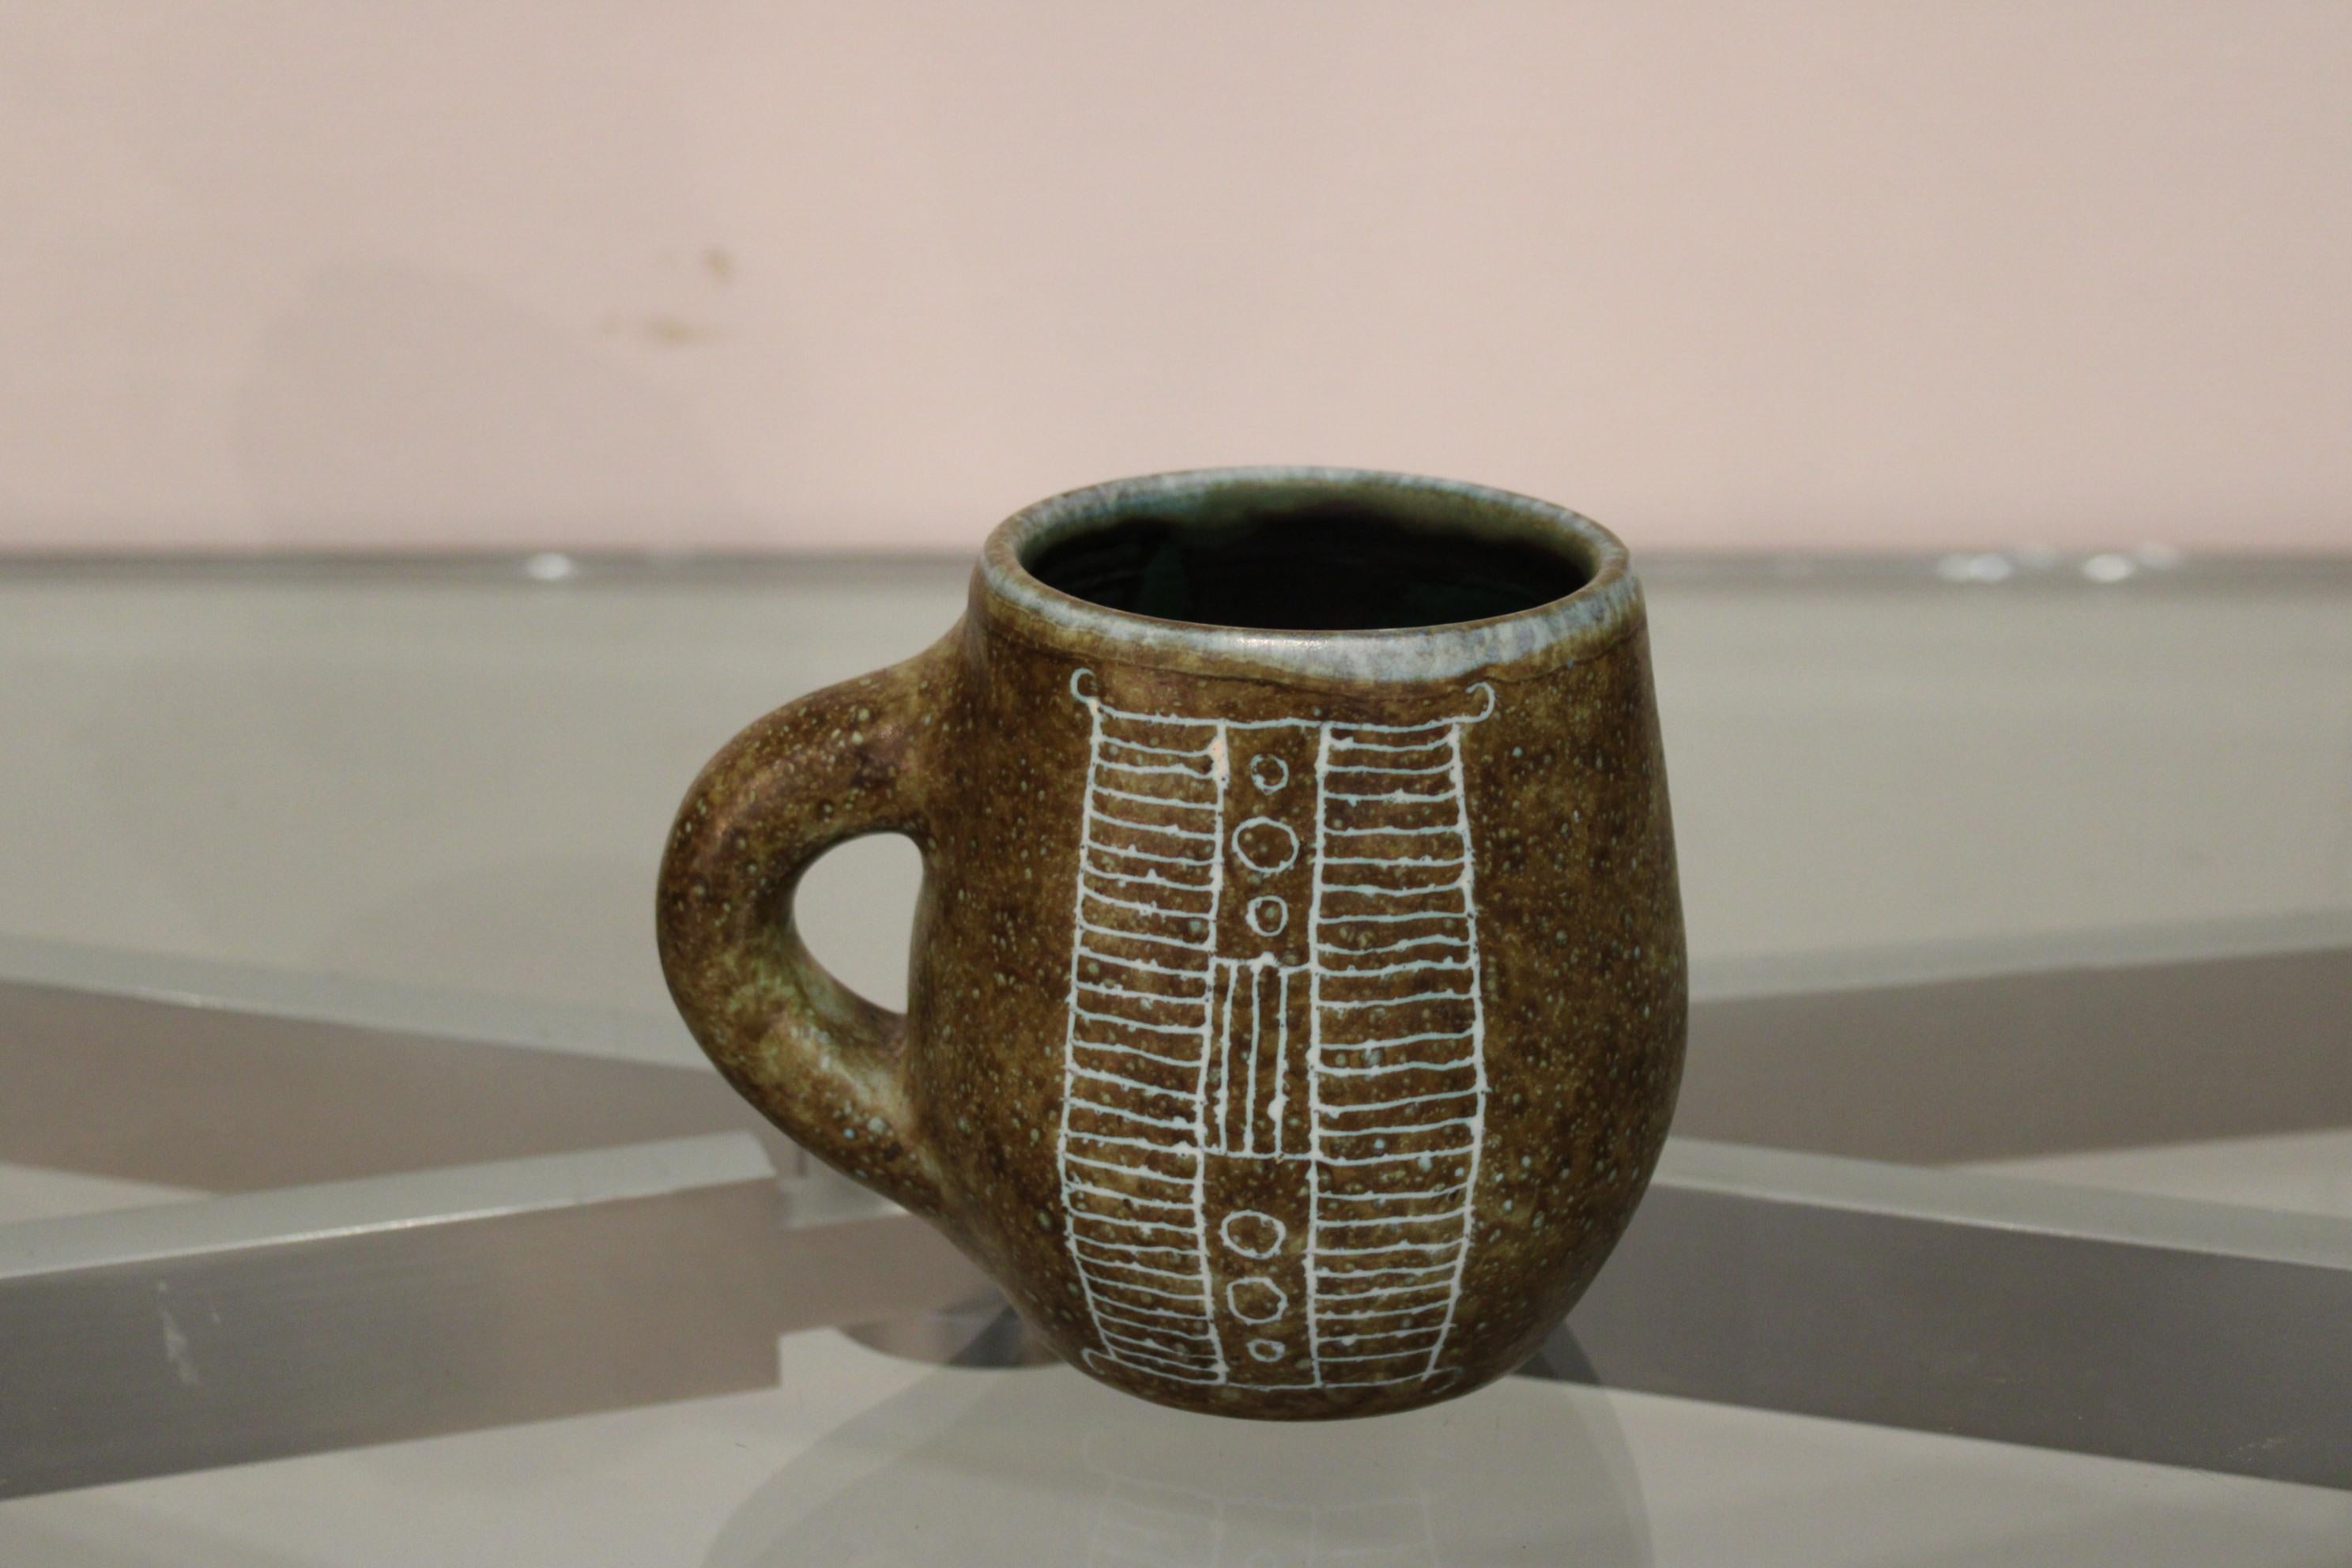 Ceramic mug by Michelle and Jacques Serre called 